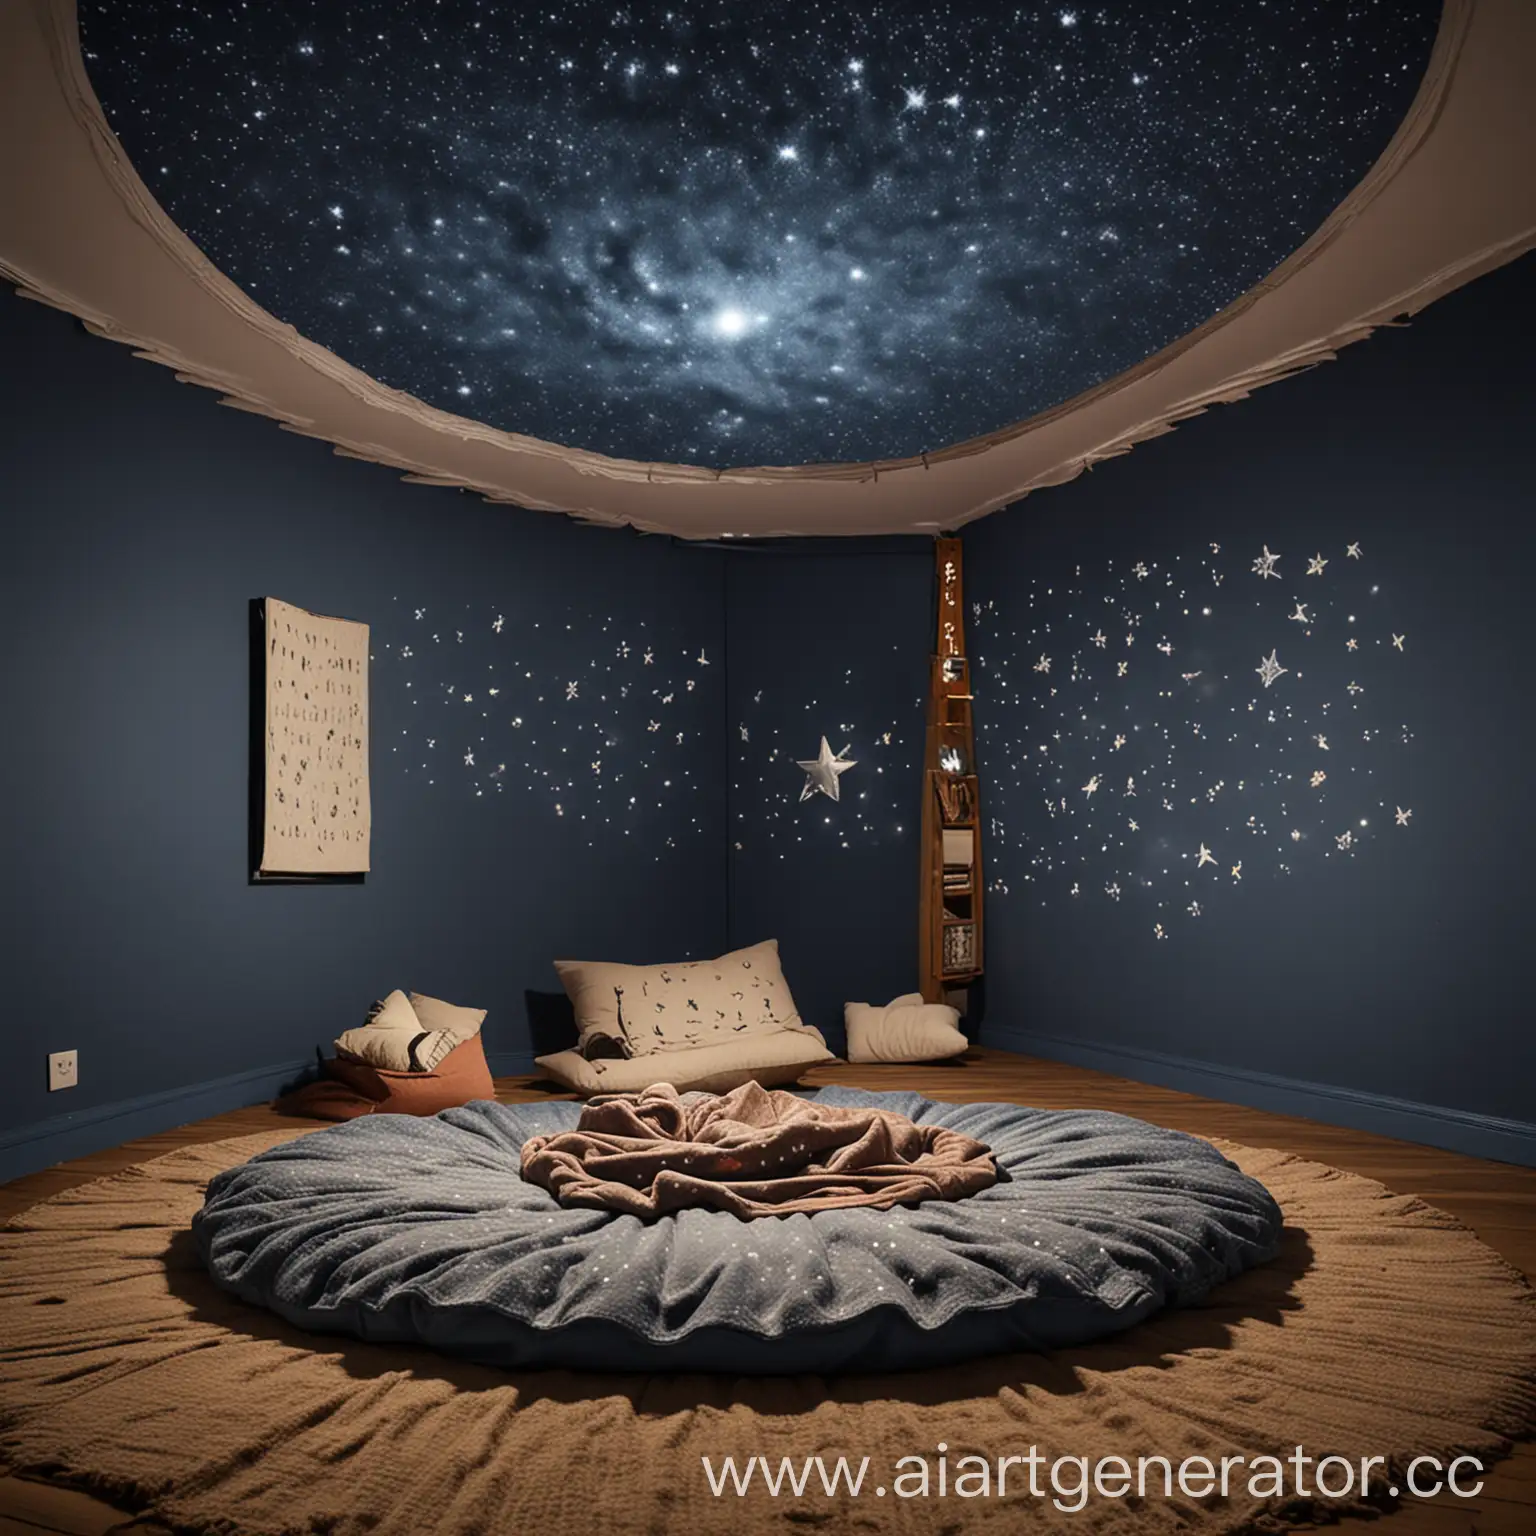 Cozy-Circle-of-Cushions-and-Blankets-under-a-Starry-Sky-Projector